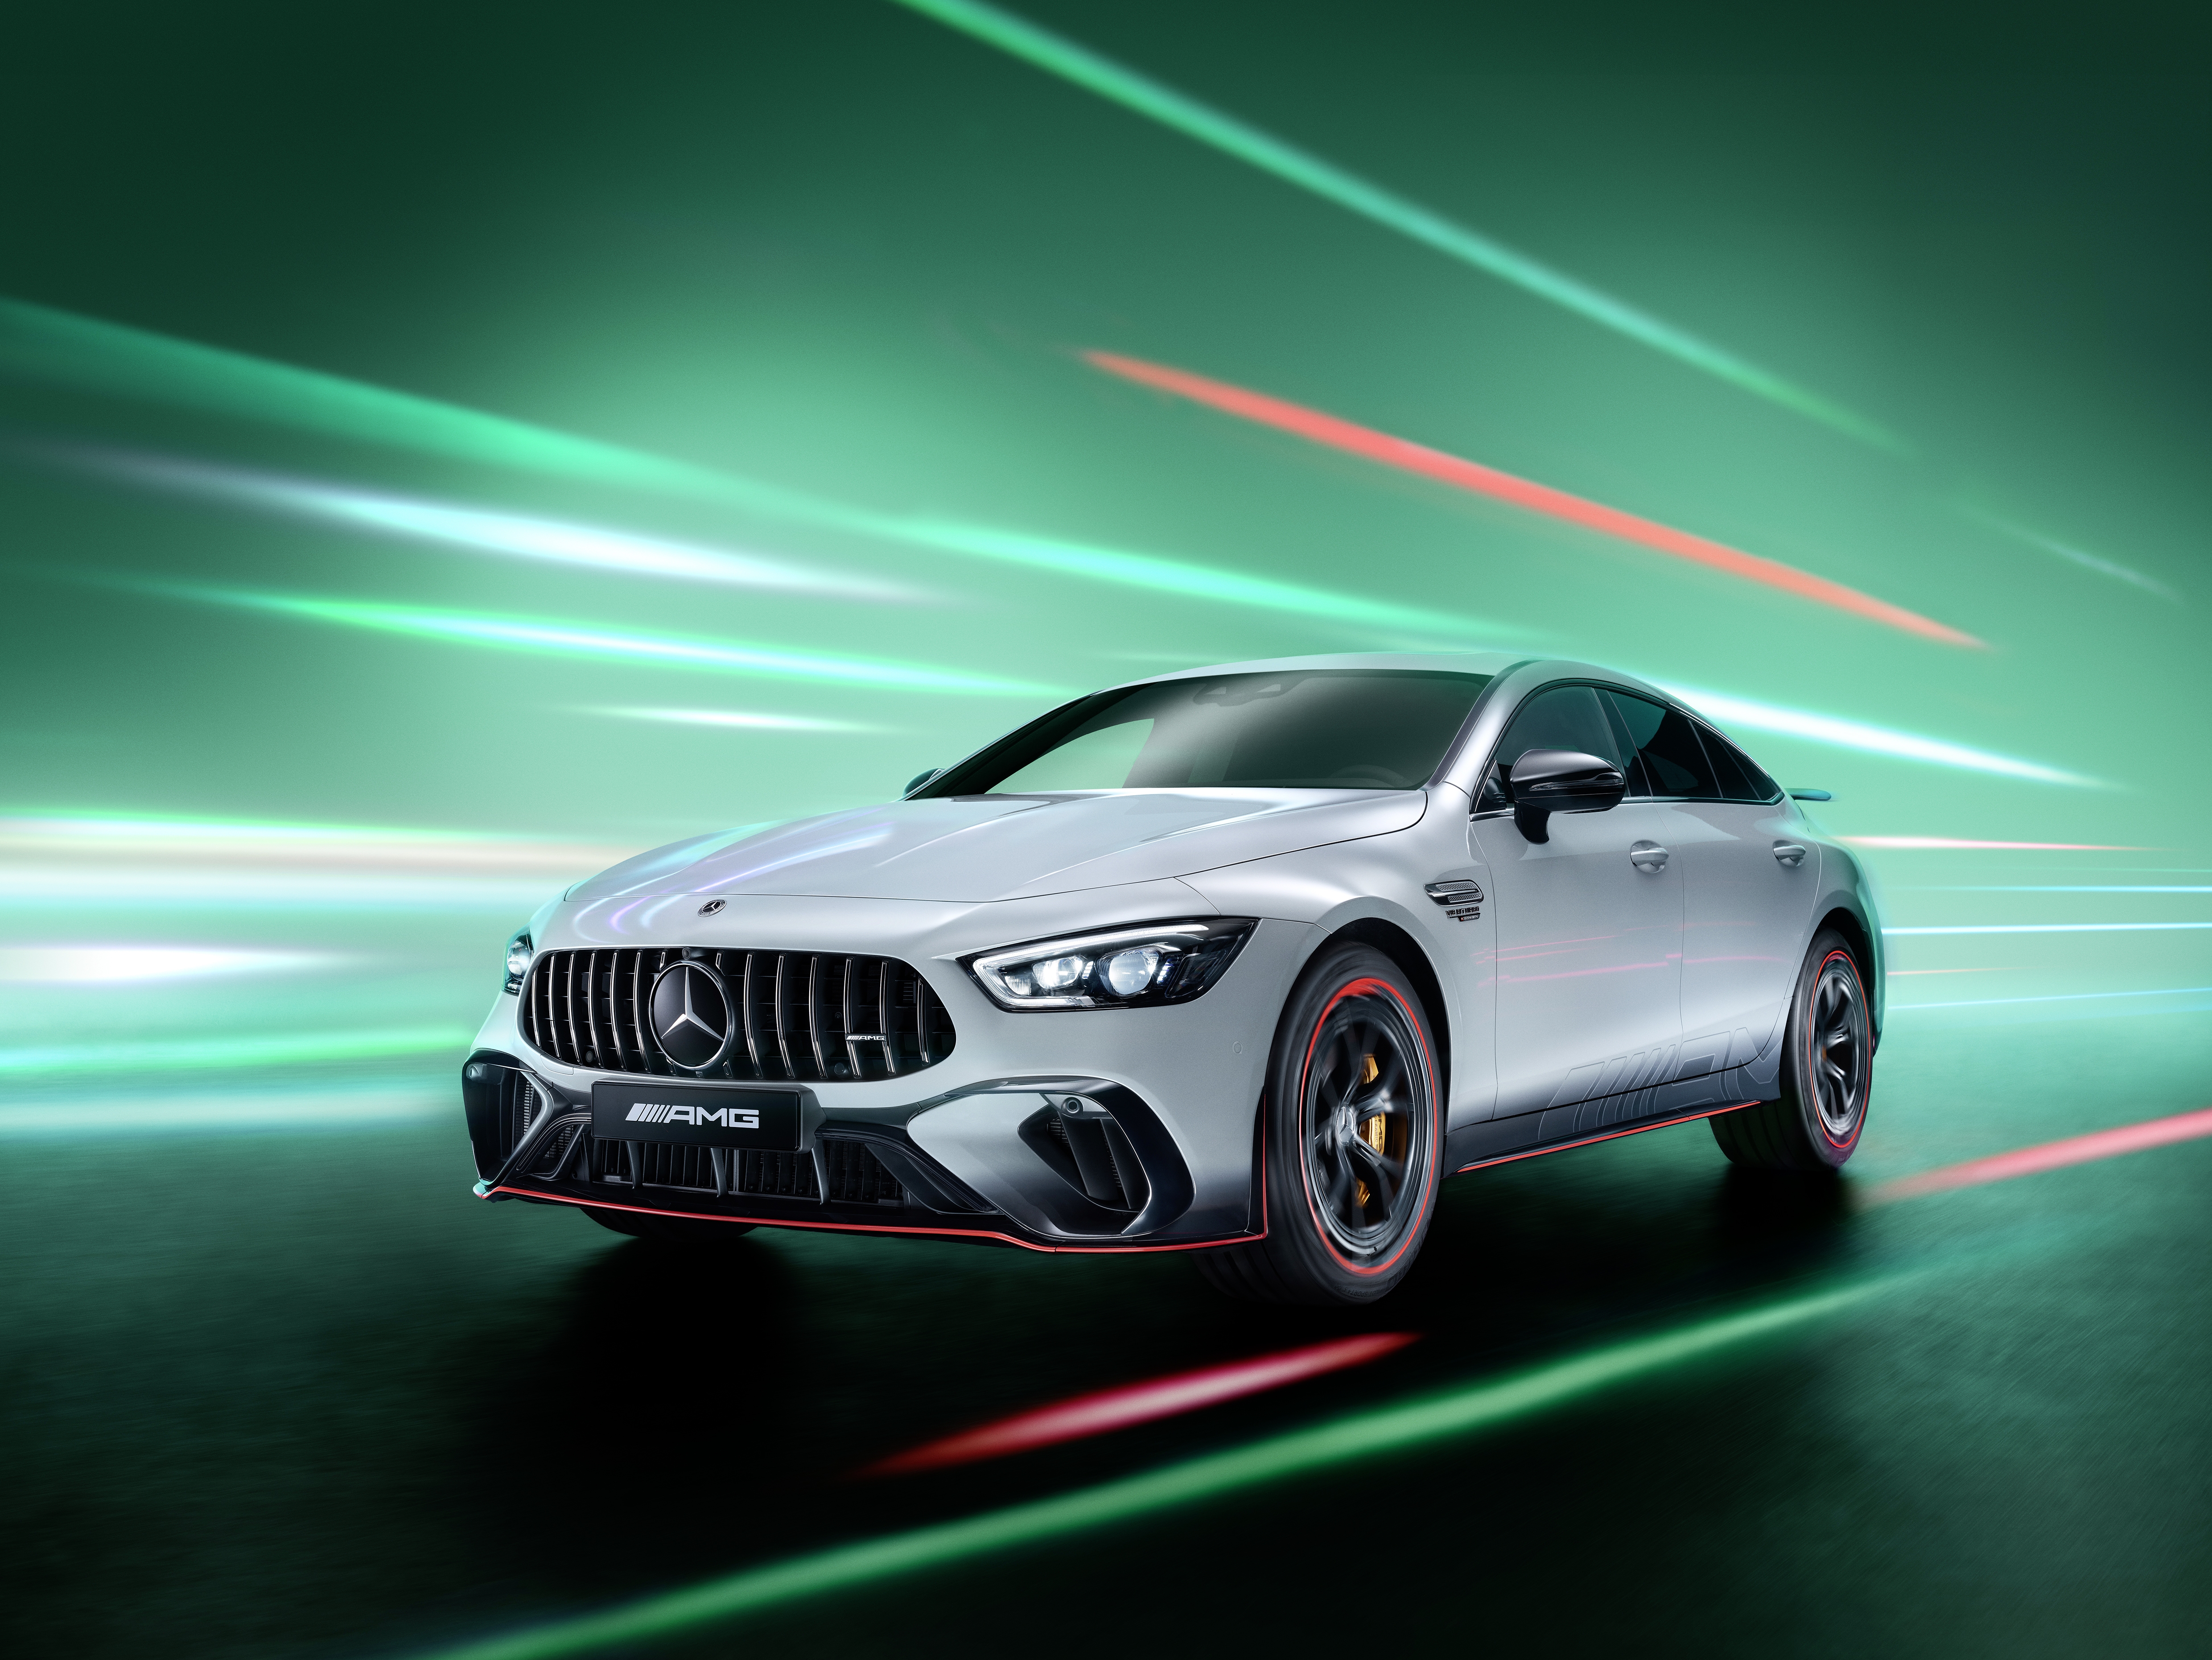 HD wallpaper, 5K, 4 Door Coupe, F1 Edition, Mercedes Amg Gt 63 S E Performance, 2022